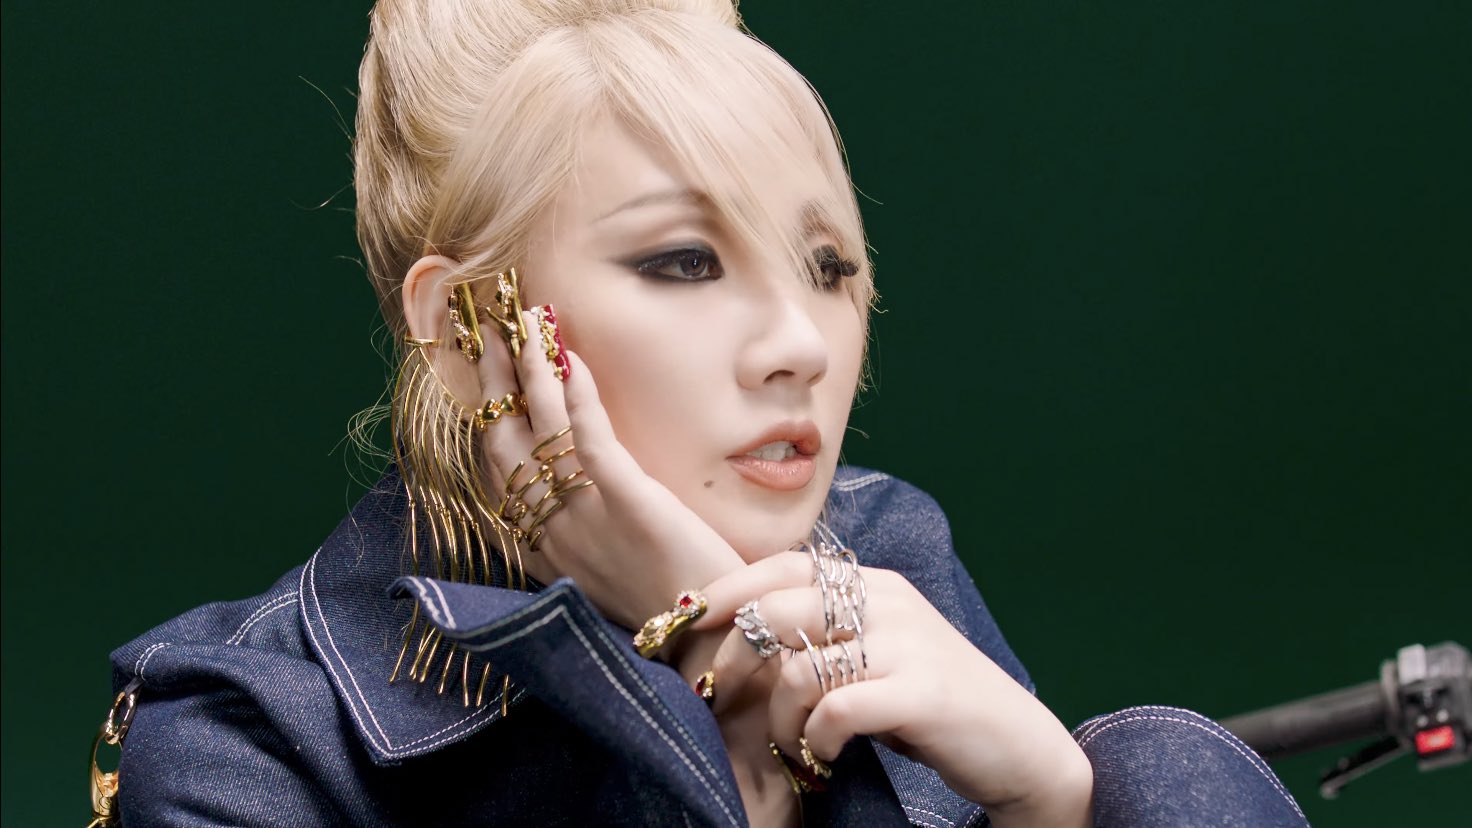 cl lover like me music video makeup beauty fashion style